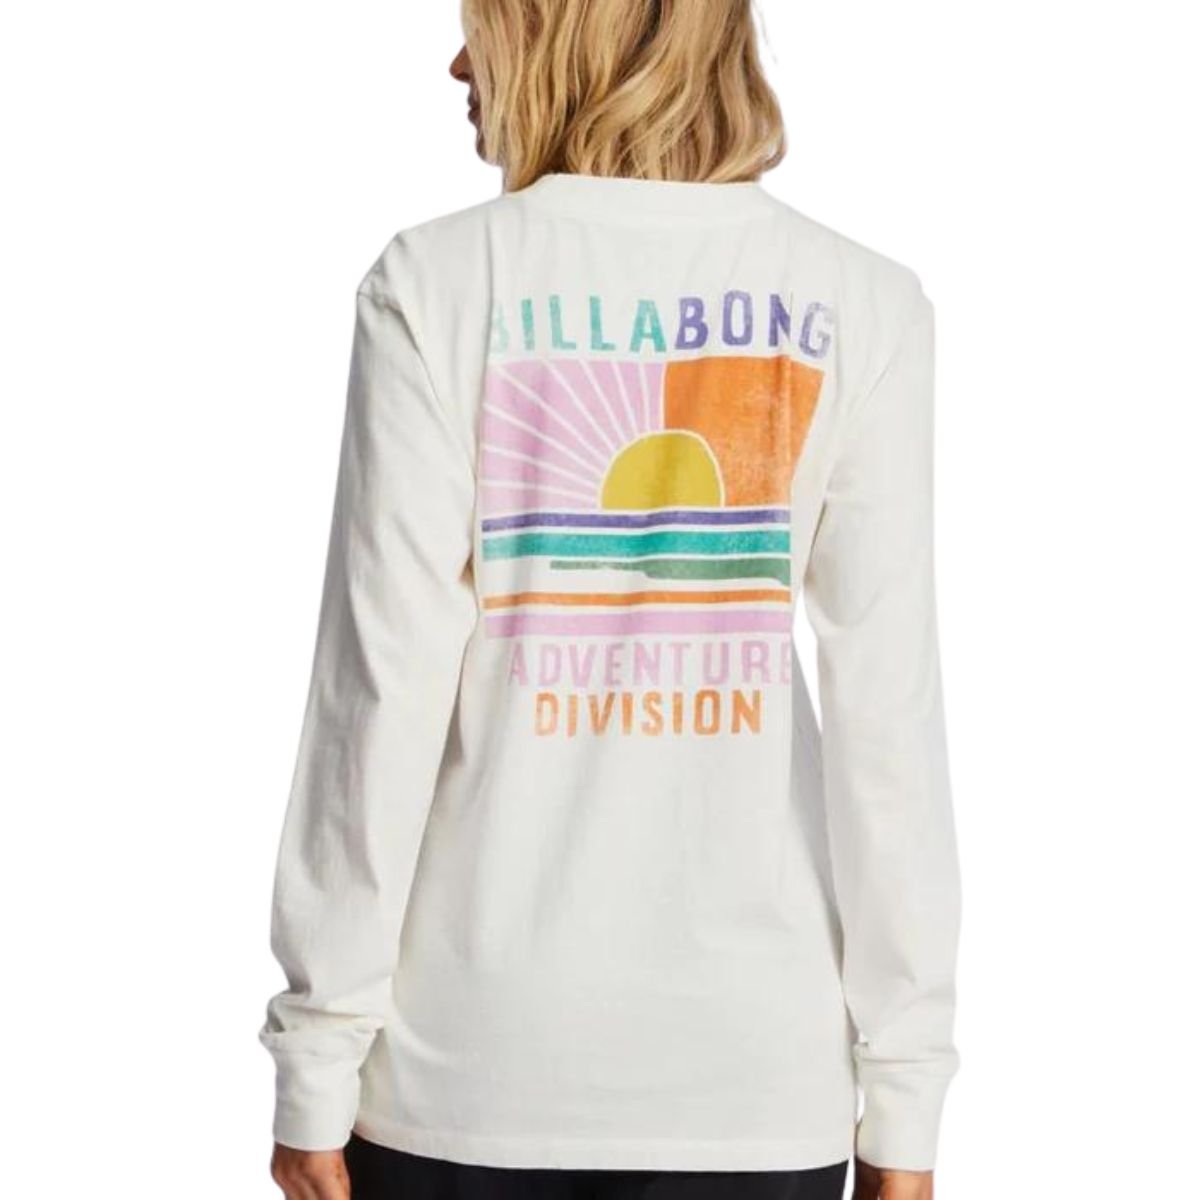 Billabong A/Div Long Sleeve Tee in Antique White - BoardCo